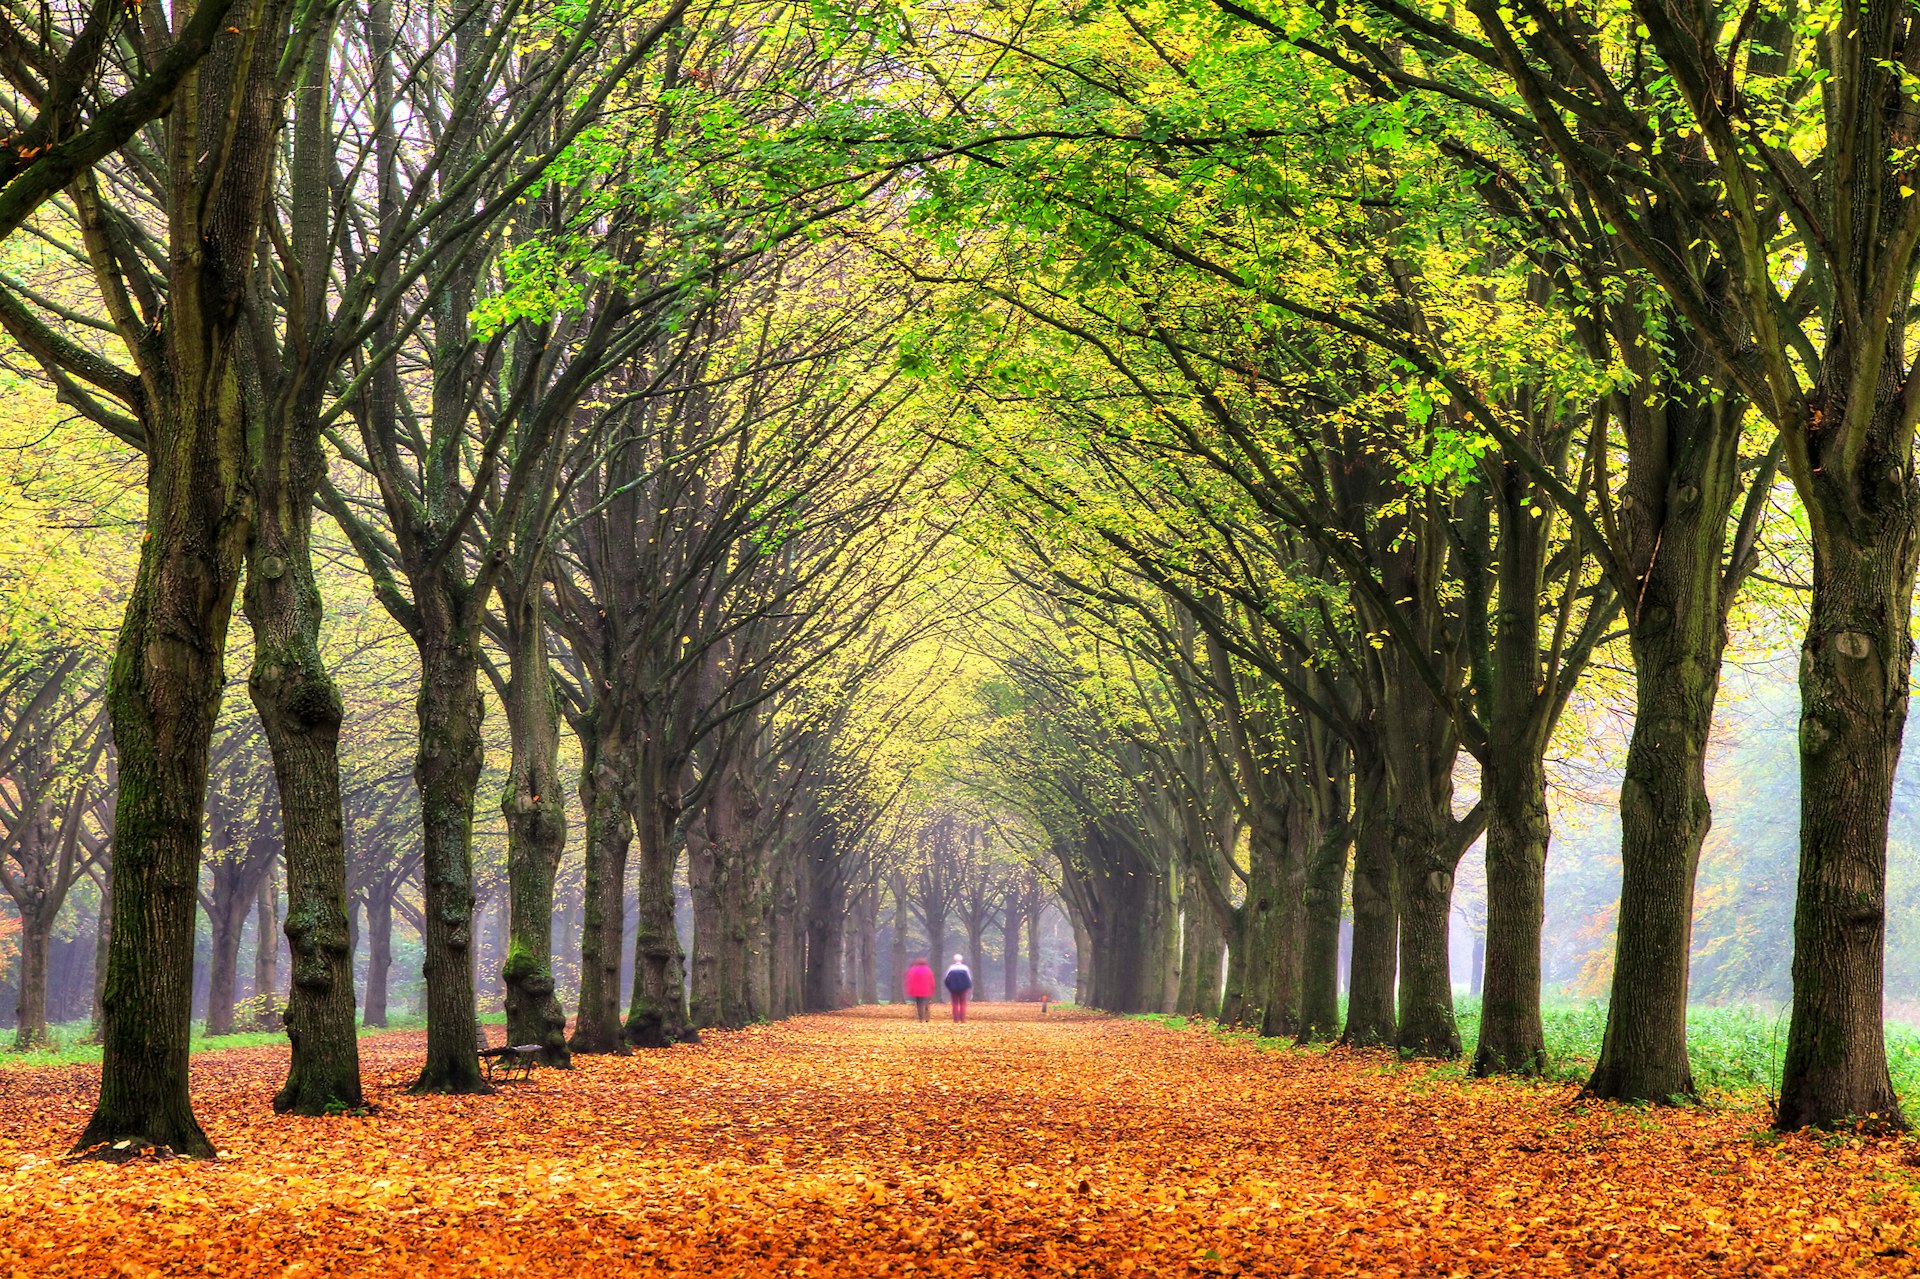 A couple stroll under a tree-lined pathway with autumn colors on the leaves overhead